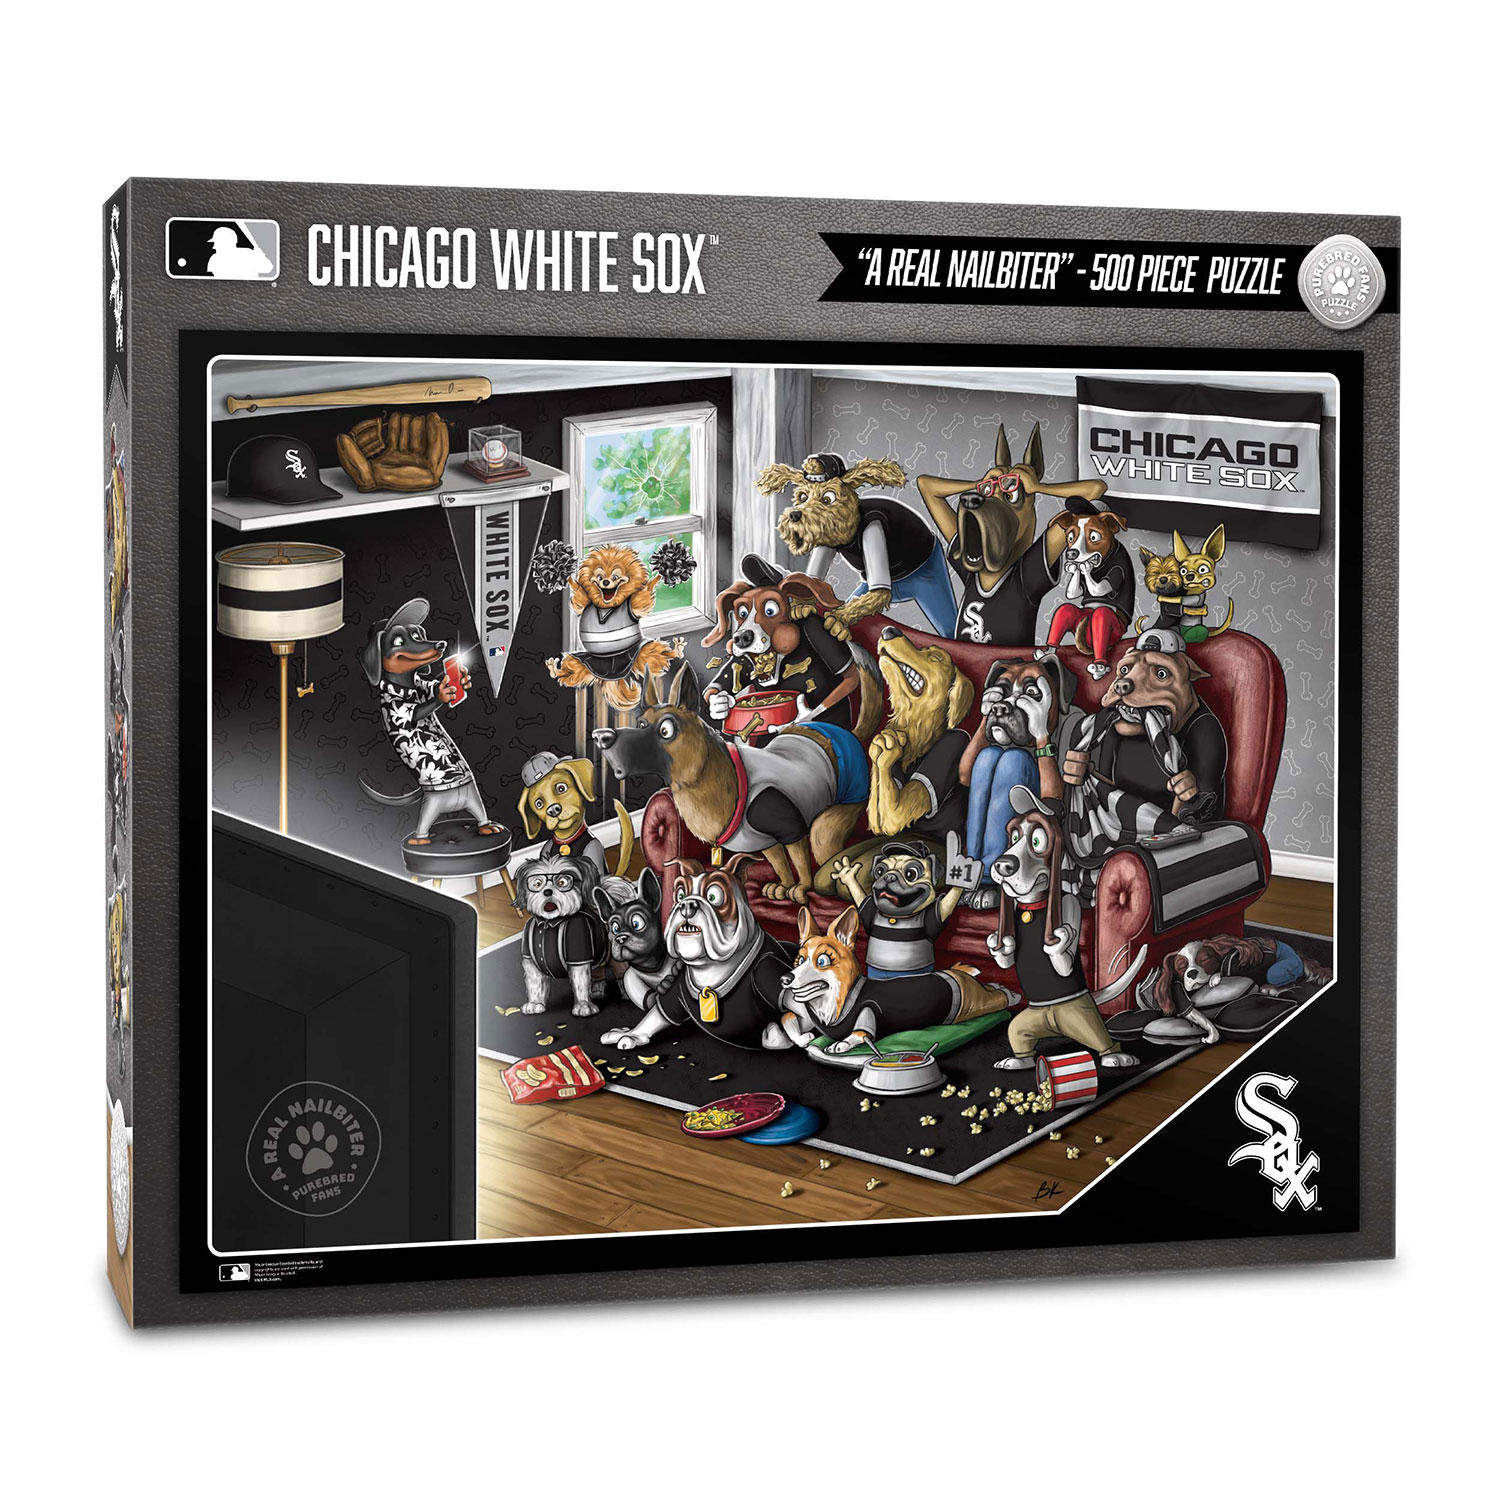 MLB Purebred Fans 500pc Puzzle - 'A Real Nailbiter' - Chicago White Sox